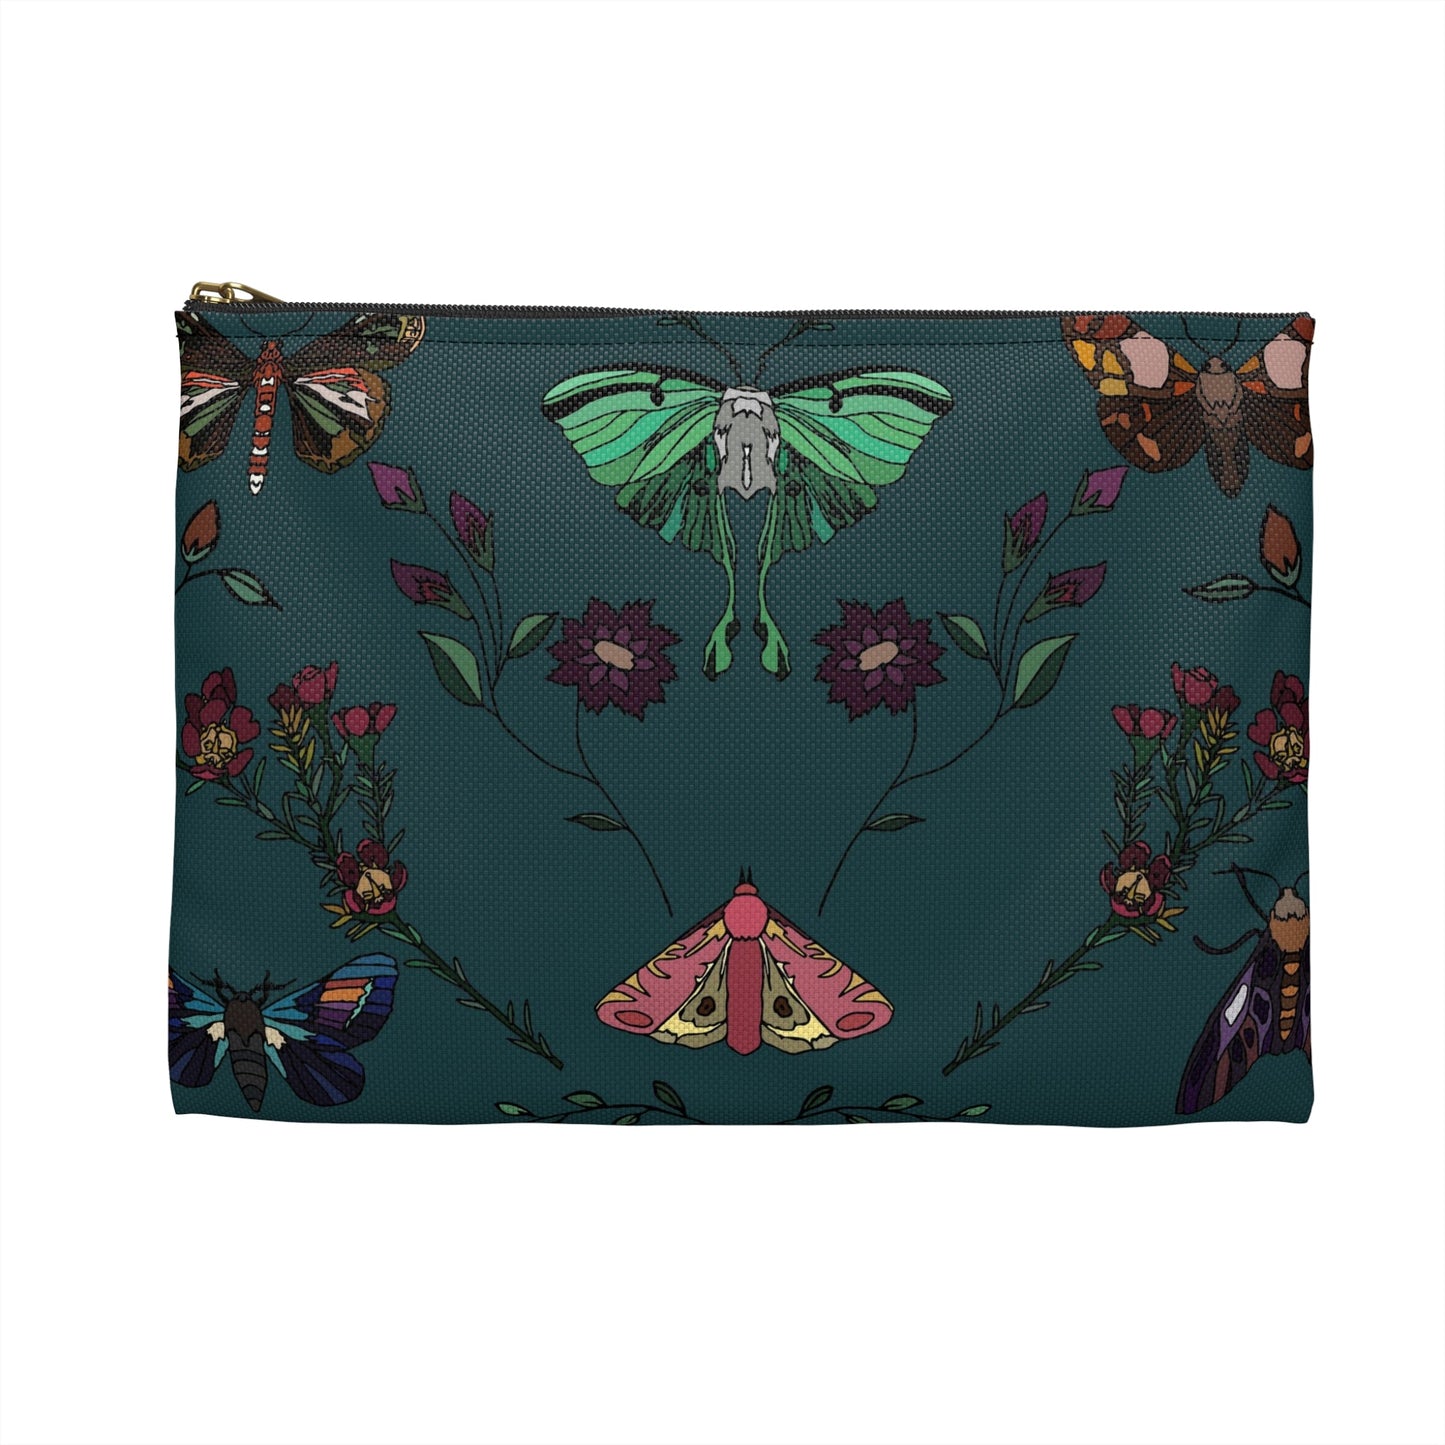 Winged Things Teal Accessory Pouch - Fox & Joy